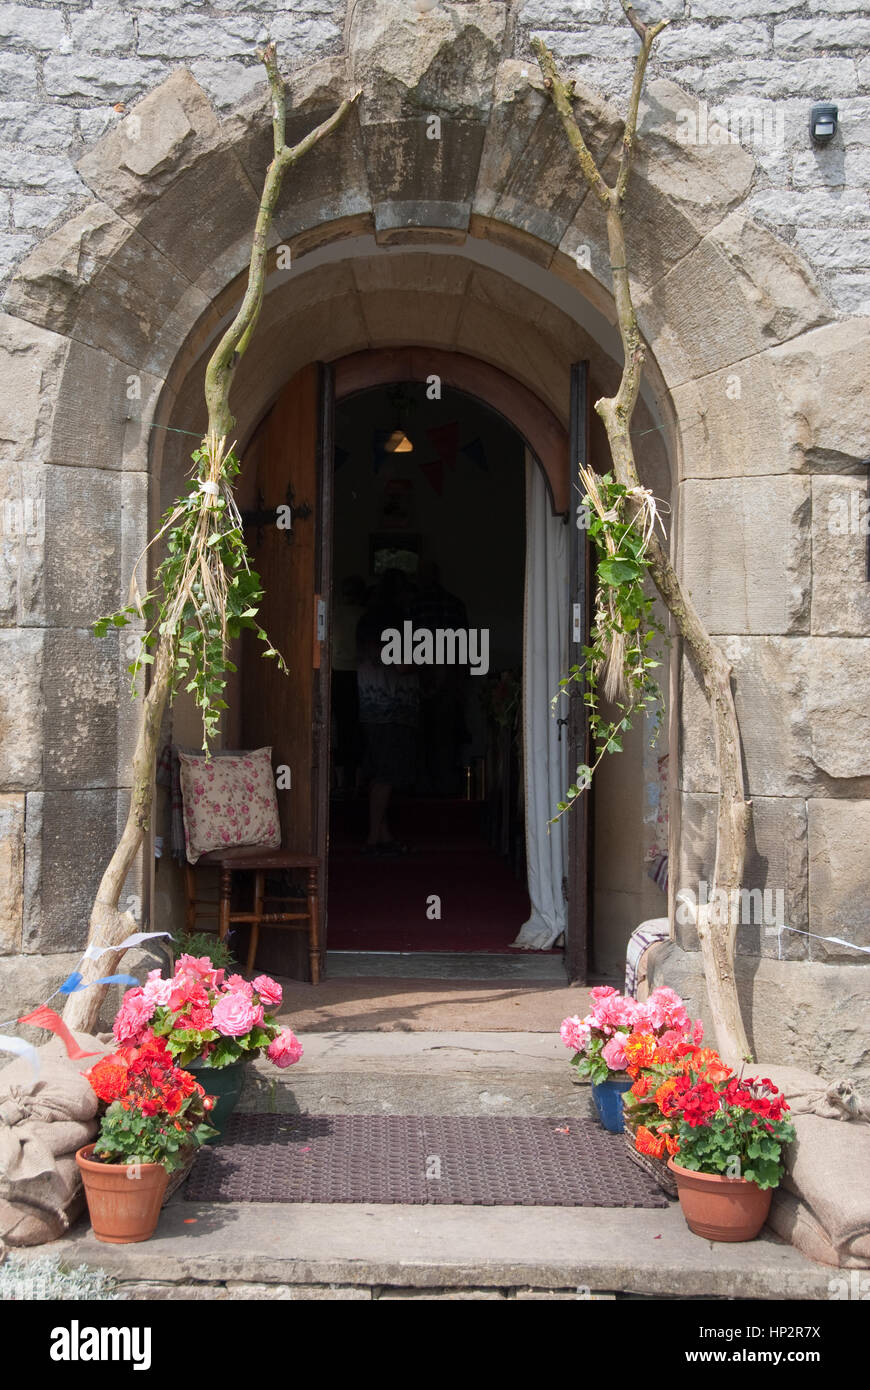 Derbyshire, UK - July 20 2014 - Little Longstone Congregational Chapel entrance dressed and decorated on 20 July for the Flower Festival Stock Photo